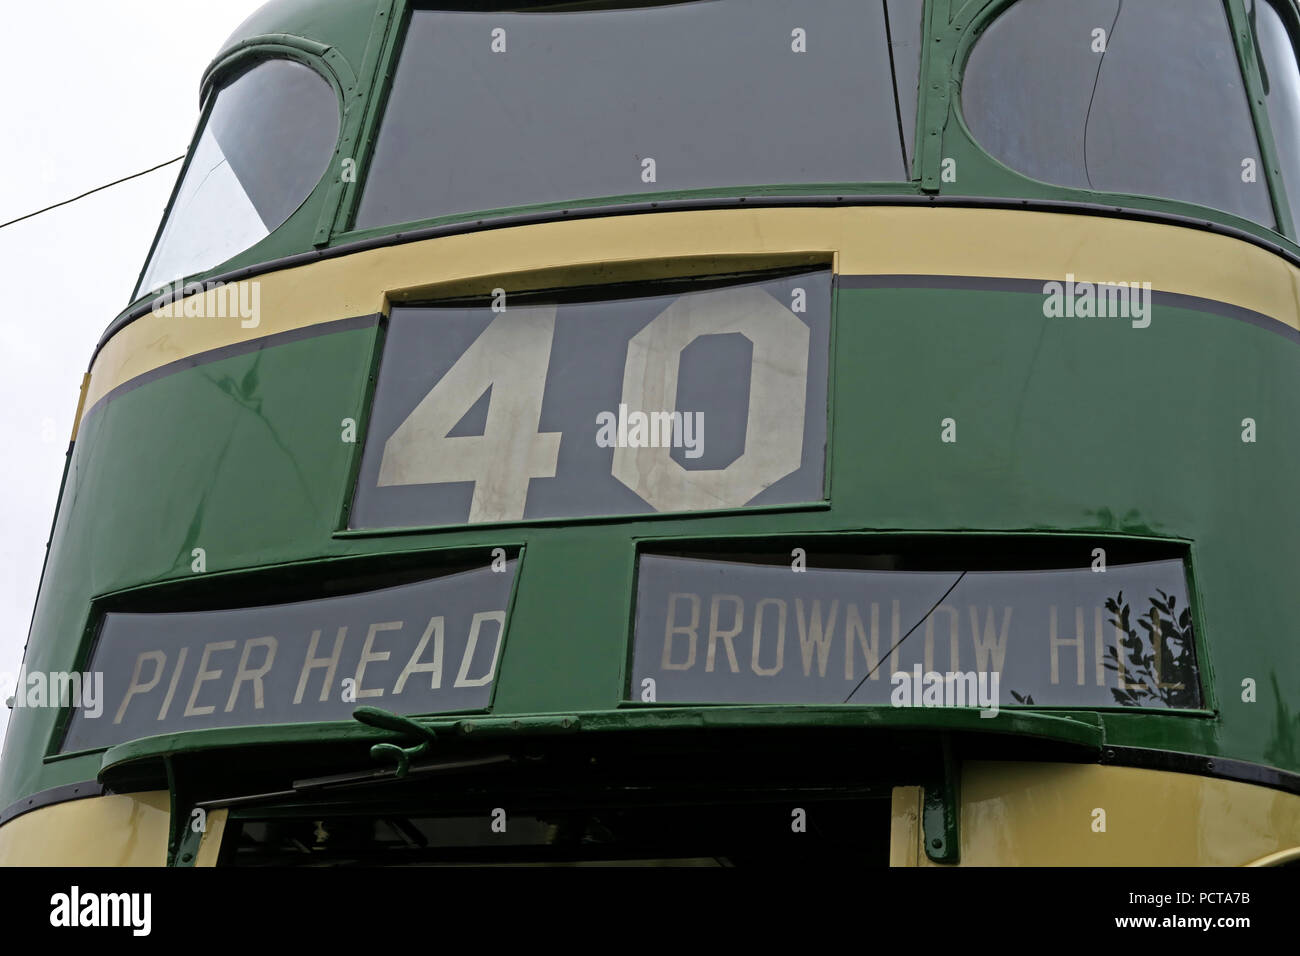 Wirral Tramway public, Crème Vert Pierhead Brownlow hill tram, Merseyside, North West England, UK Banque D'Images